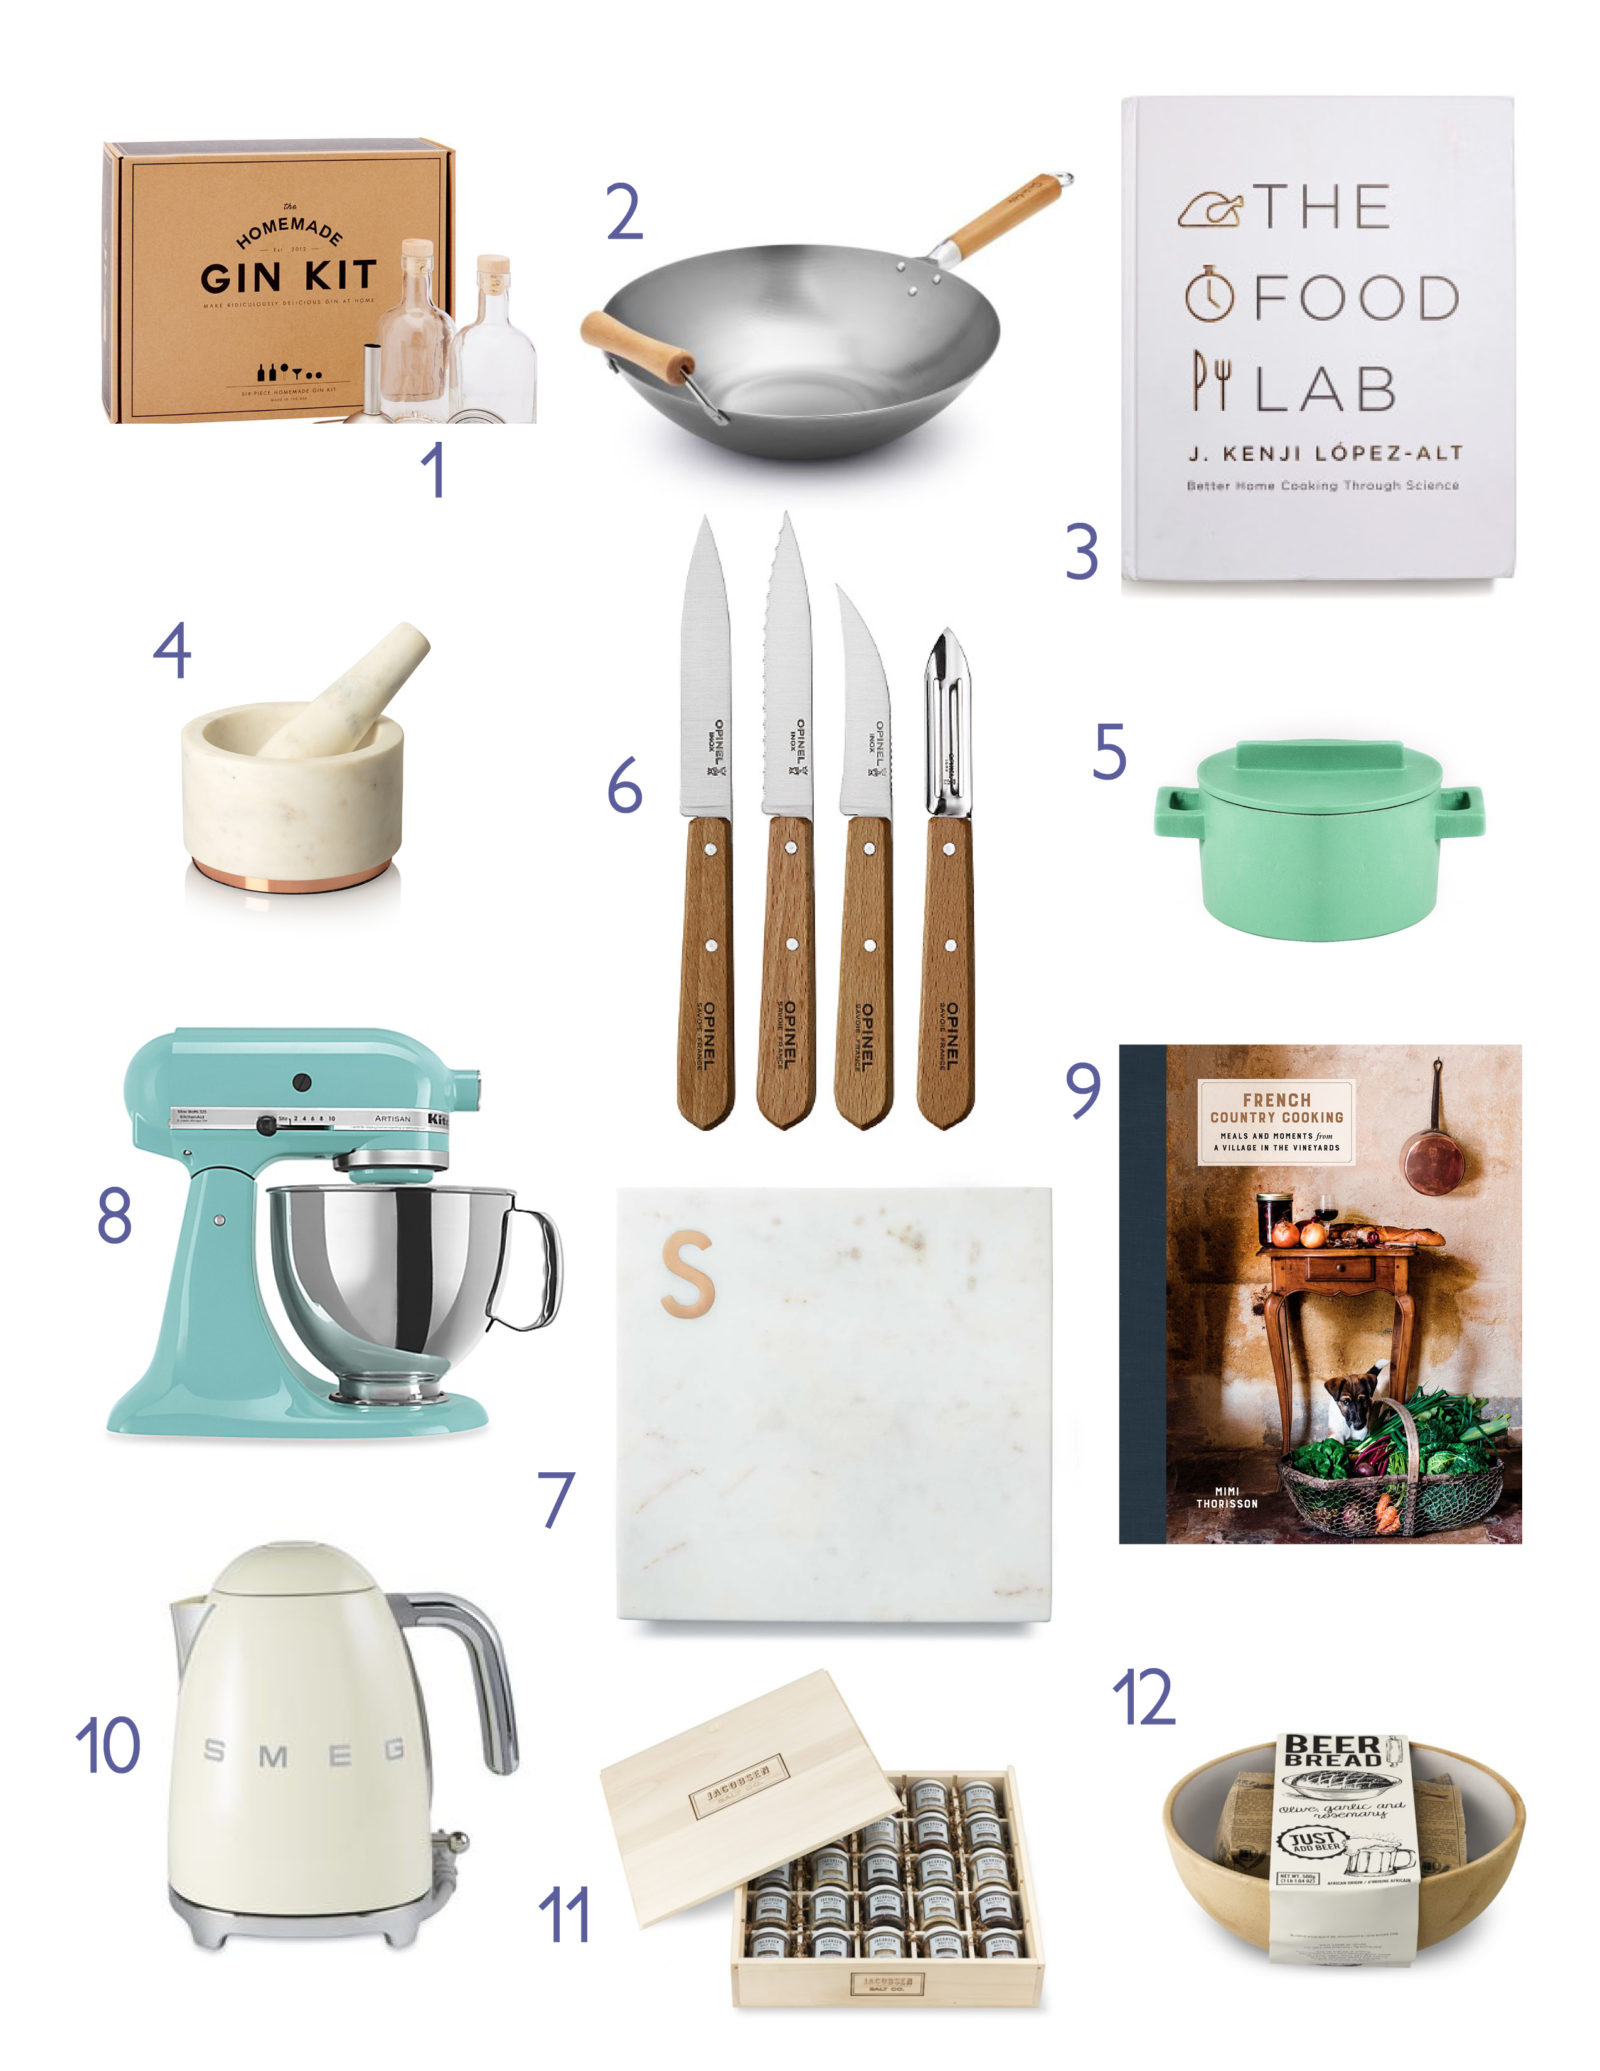 The 2016 Holiday Gift Guide for the Foodie is on the blog. From Smeg Electric Kettles, Jacobsen Salt Library and more!